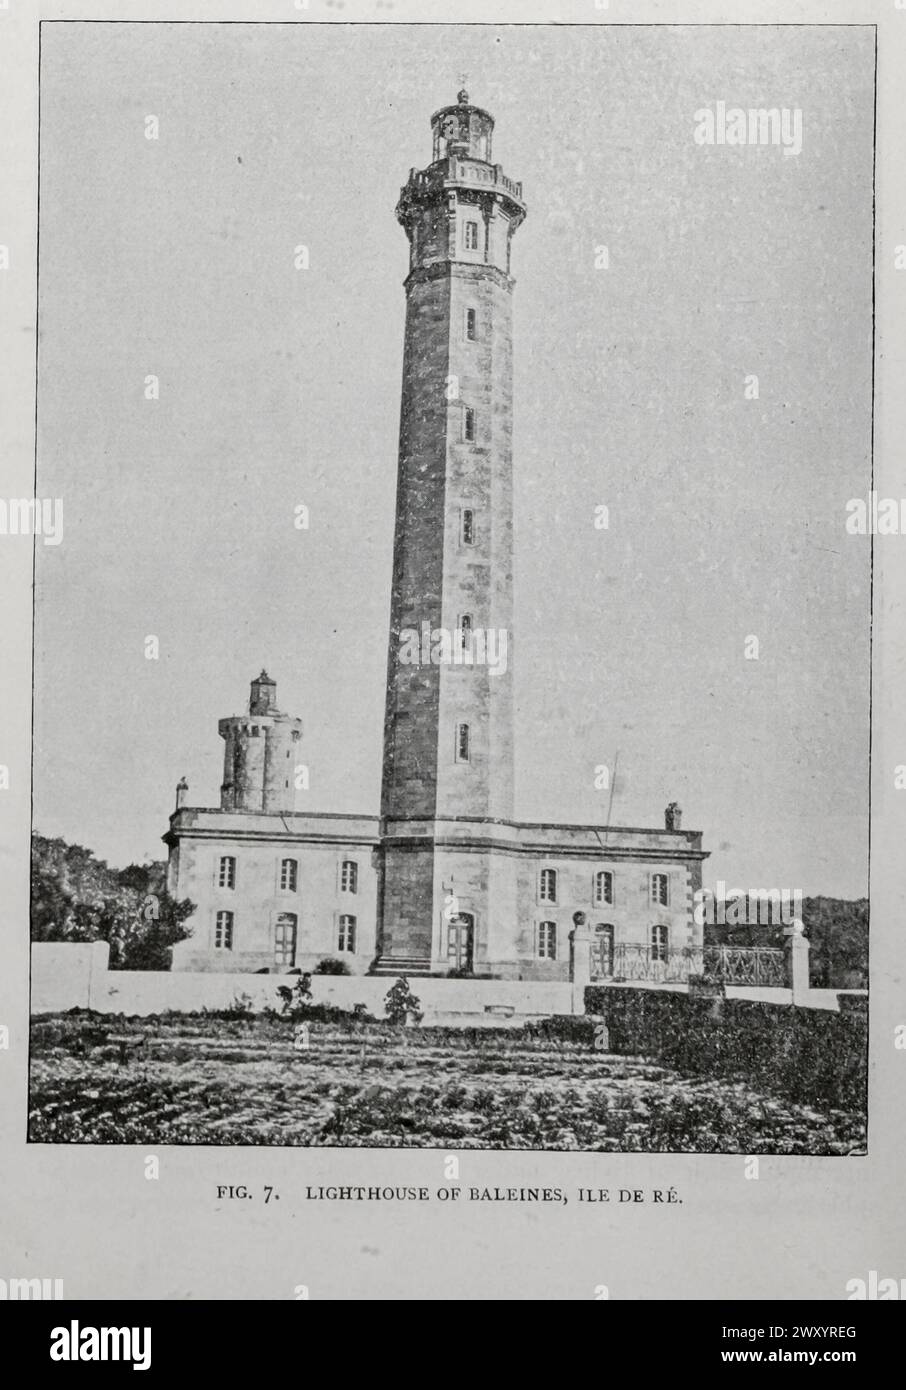 LIGHTHOUSE OF BALEINES, ILE DE RE. from the Article THE LATEST IMPROVEMENTS IN THE FRENCH LIGHTHOUSE SYSTEM. By Jacques Boyer. from The Engineering Magazine Devoted to Industrial Progress Volume XVI October 1898 - March 1899 The Engineering Magazine Co Stock Photo